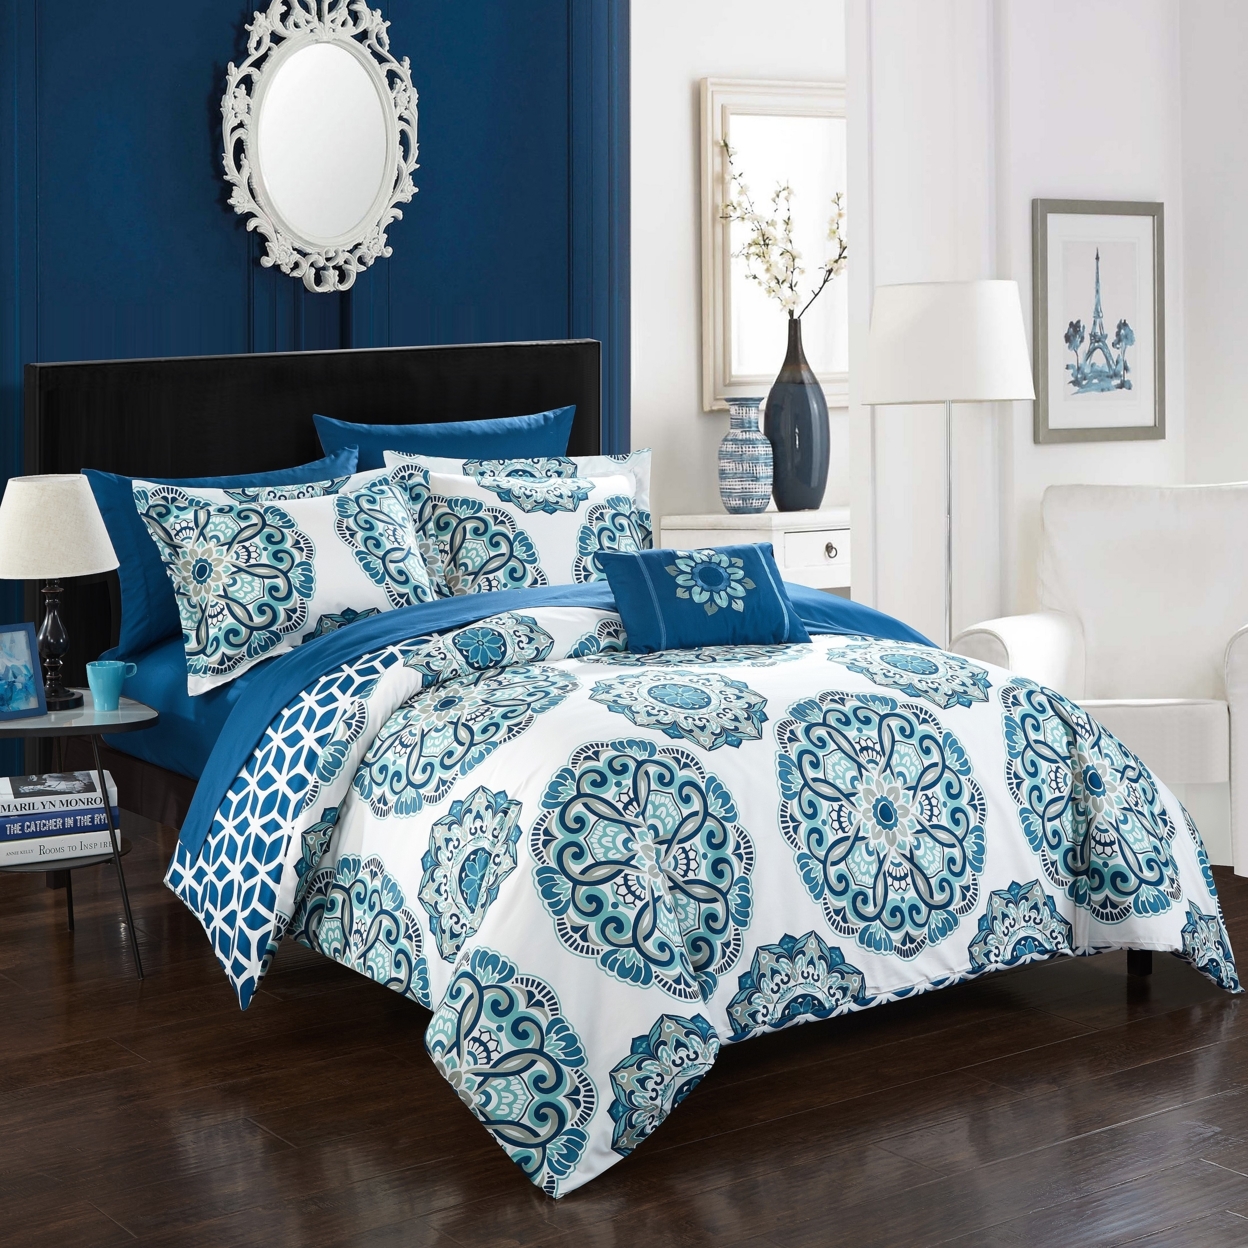 8 Or 6 Pc. Barella Super Soft Large Printed Medallion REVERSIBLE With Geometric Printed Backing Comforter Set - Blue, Queen